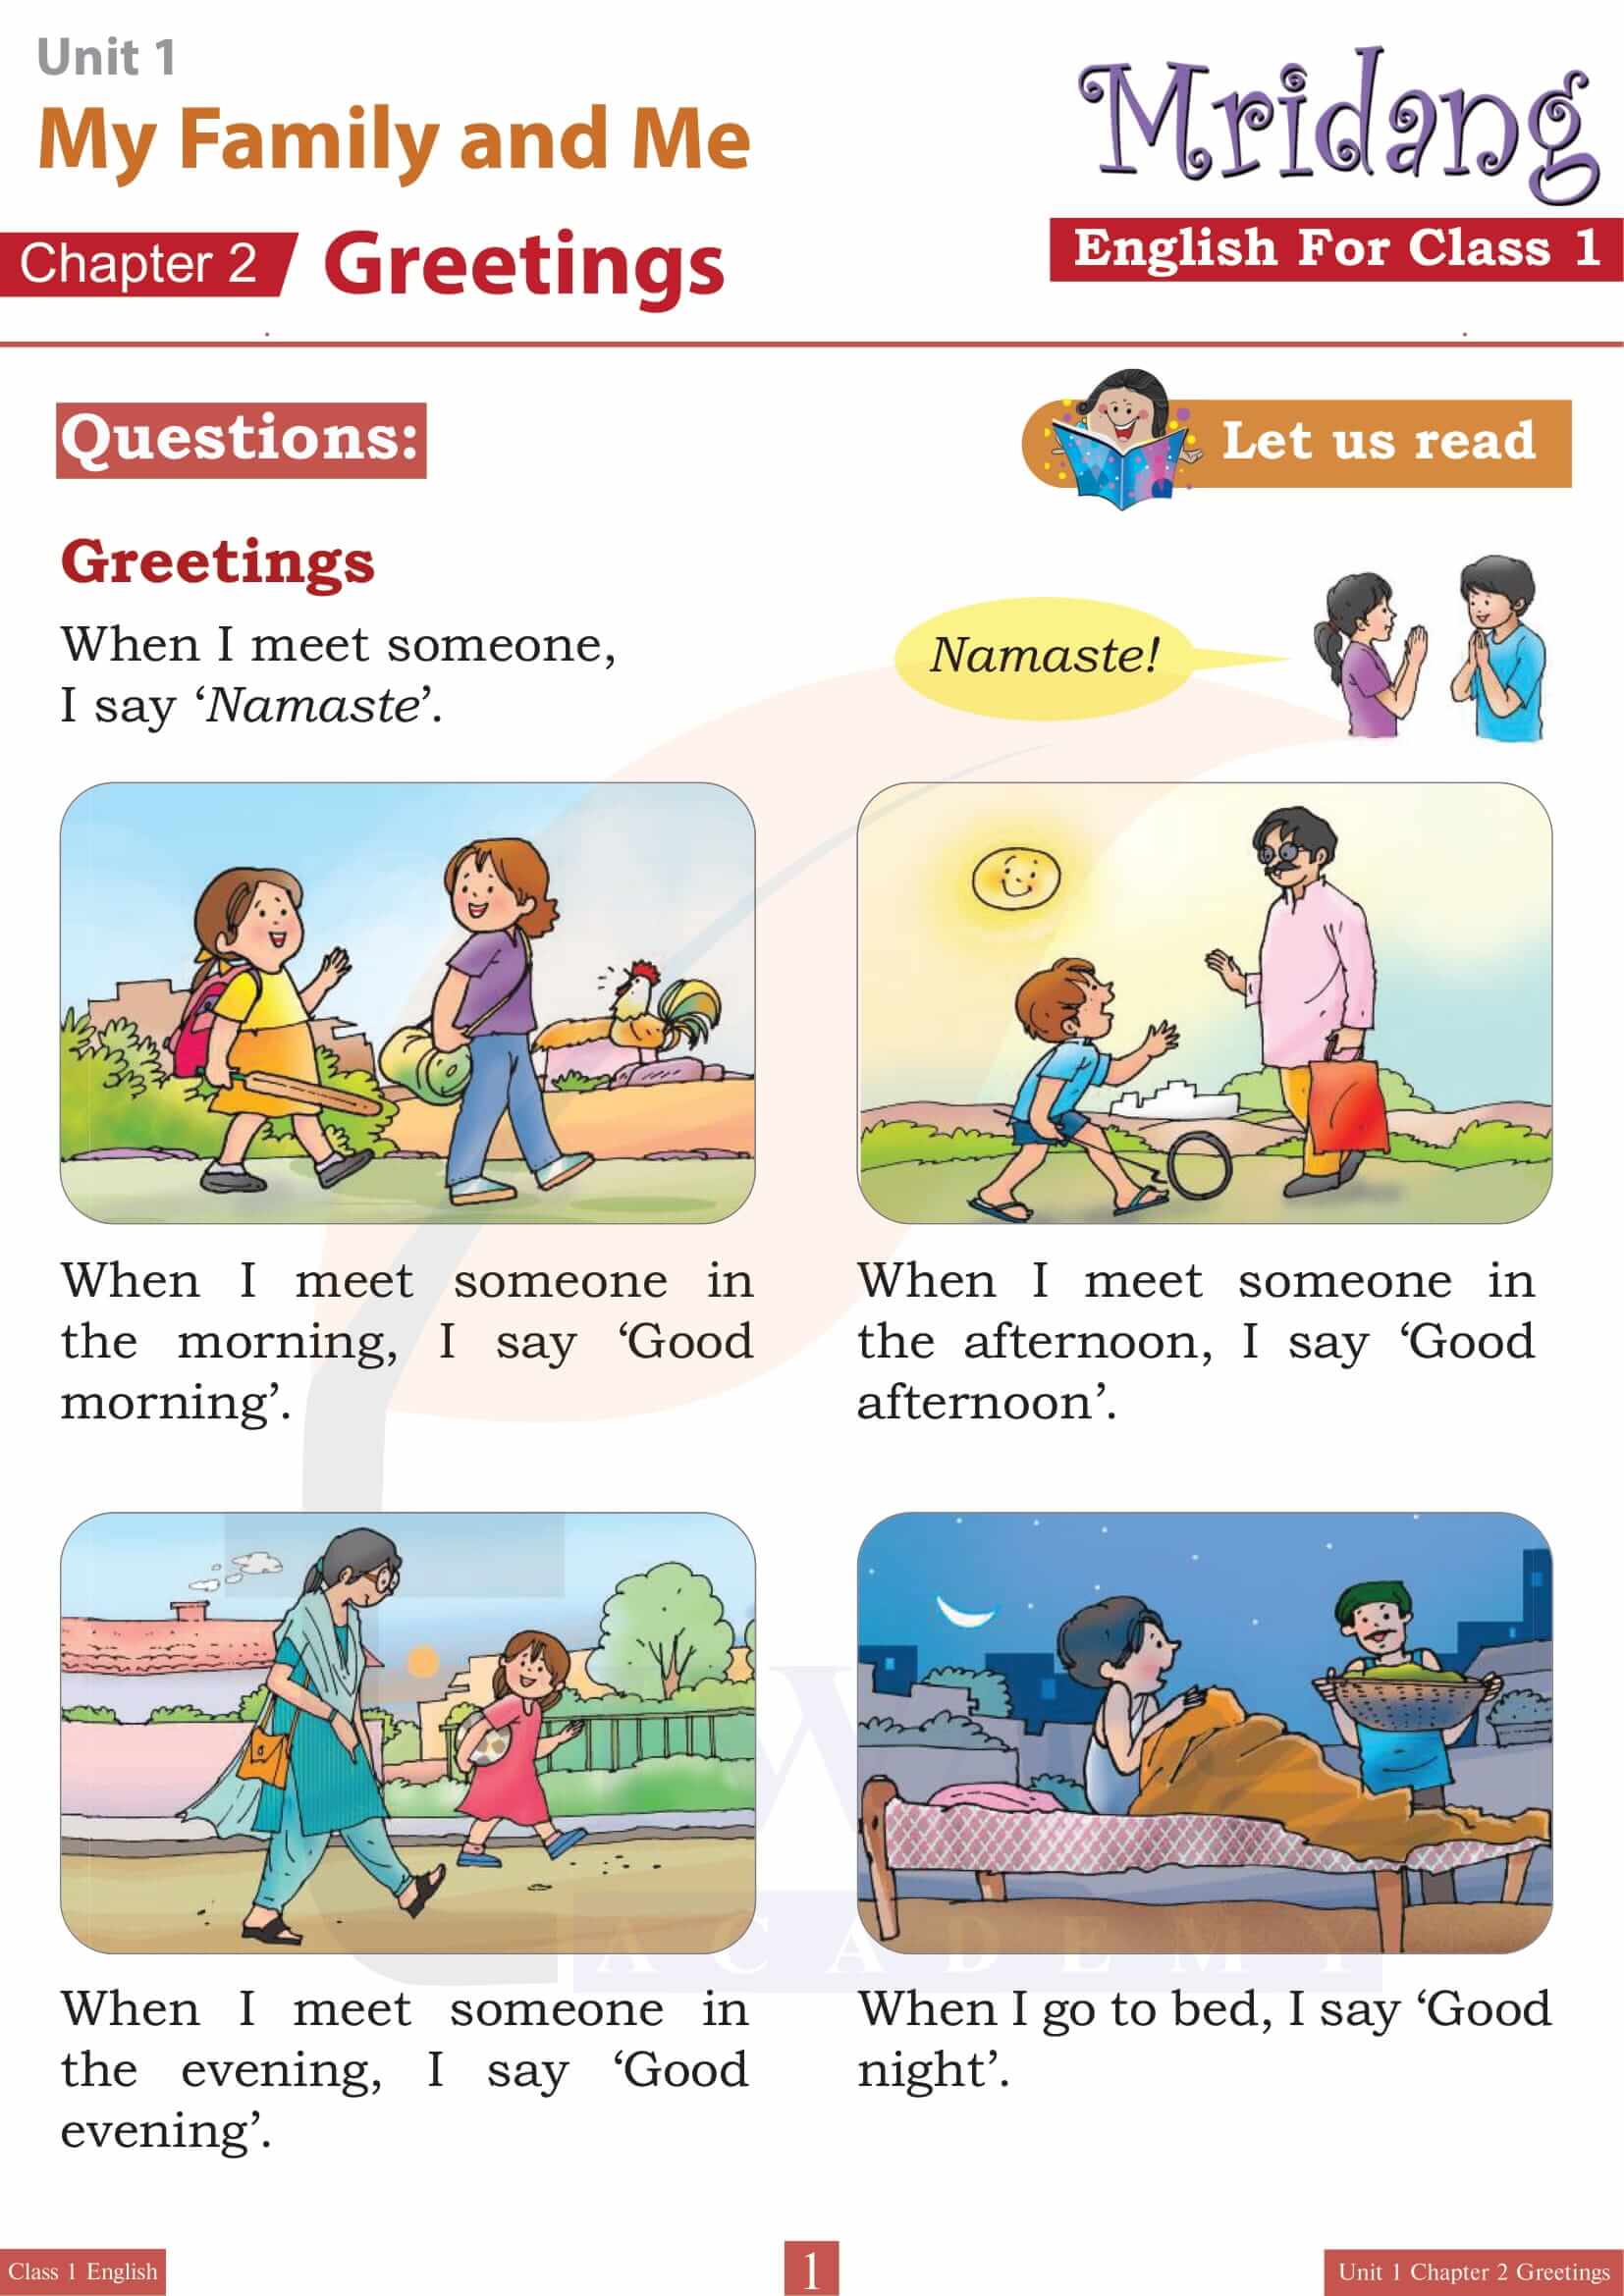 NCERT Solutions for Class 1 English Mridang Chapter 2 Greetings of Unit 1 My Family and Me